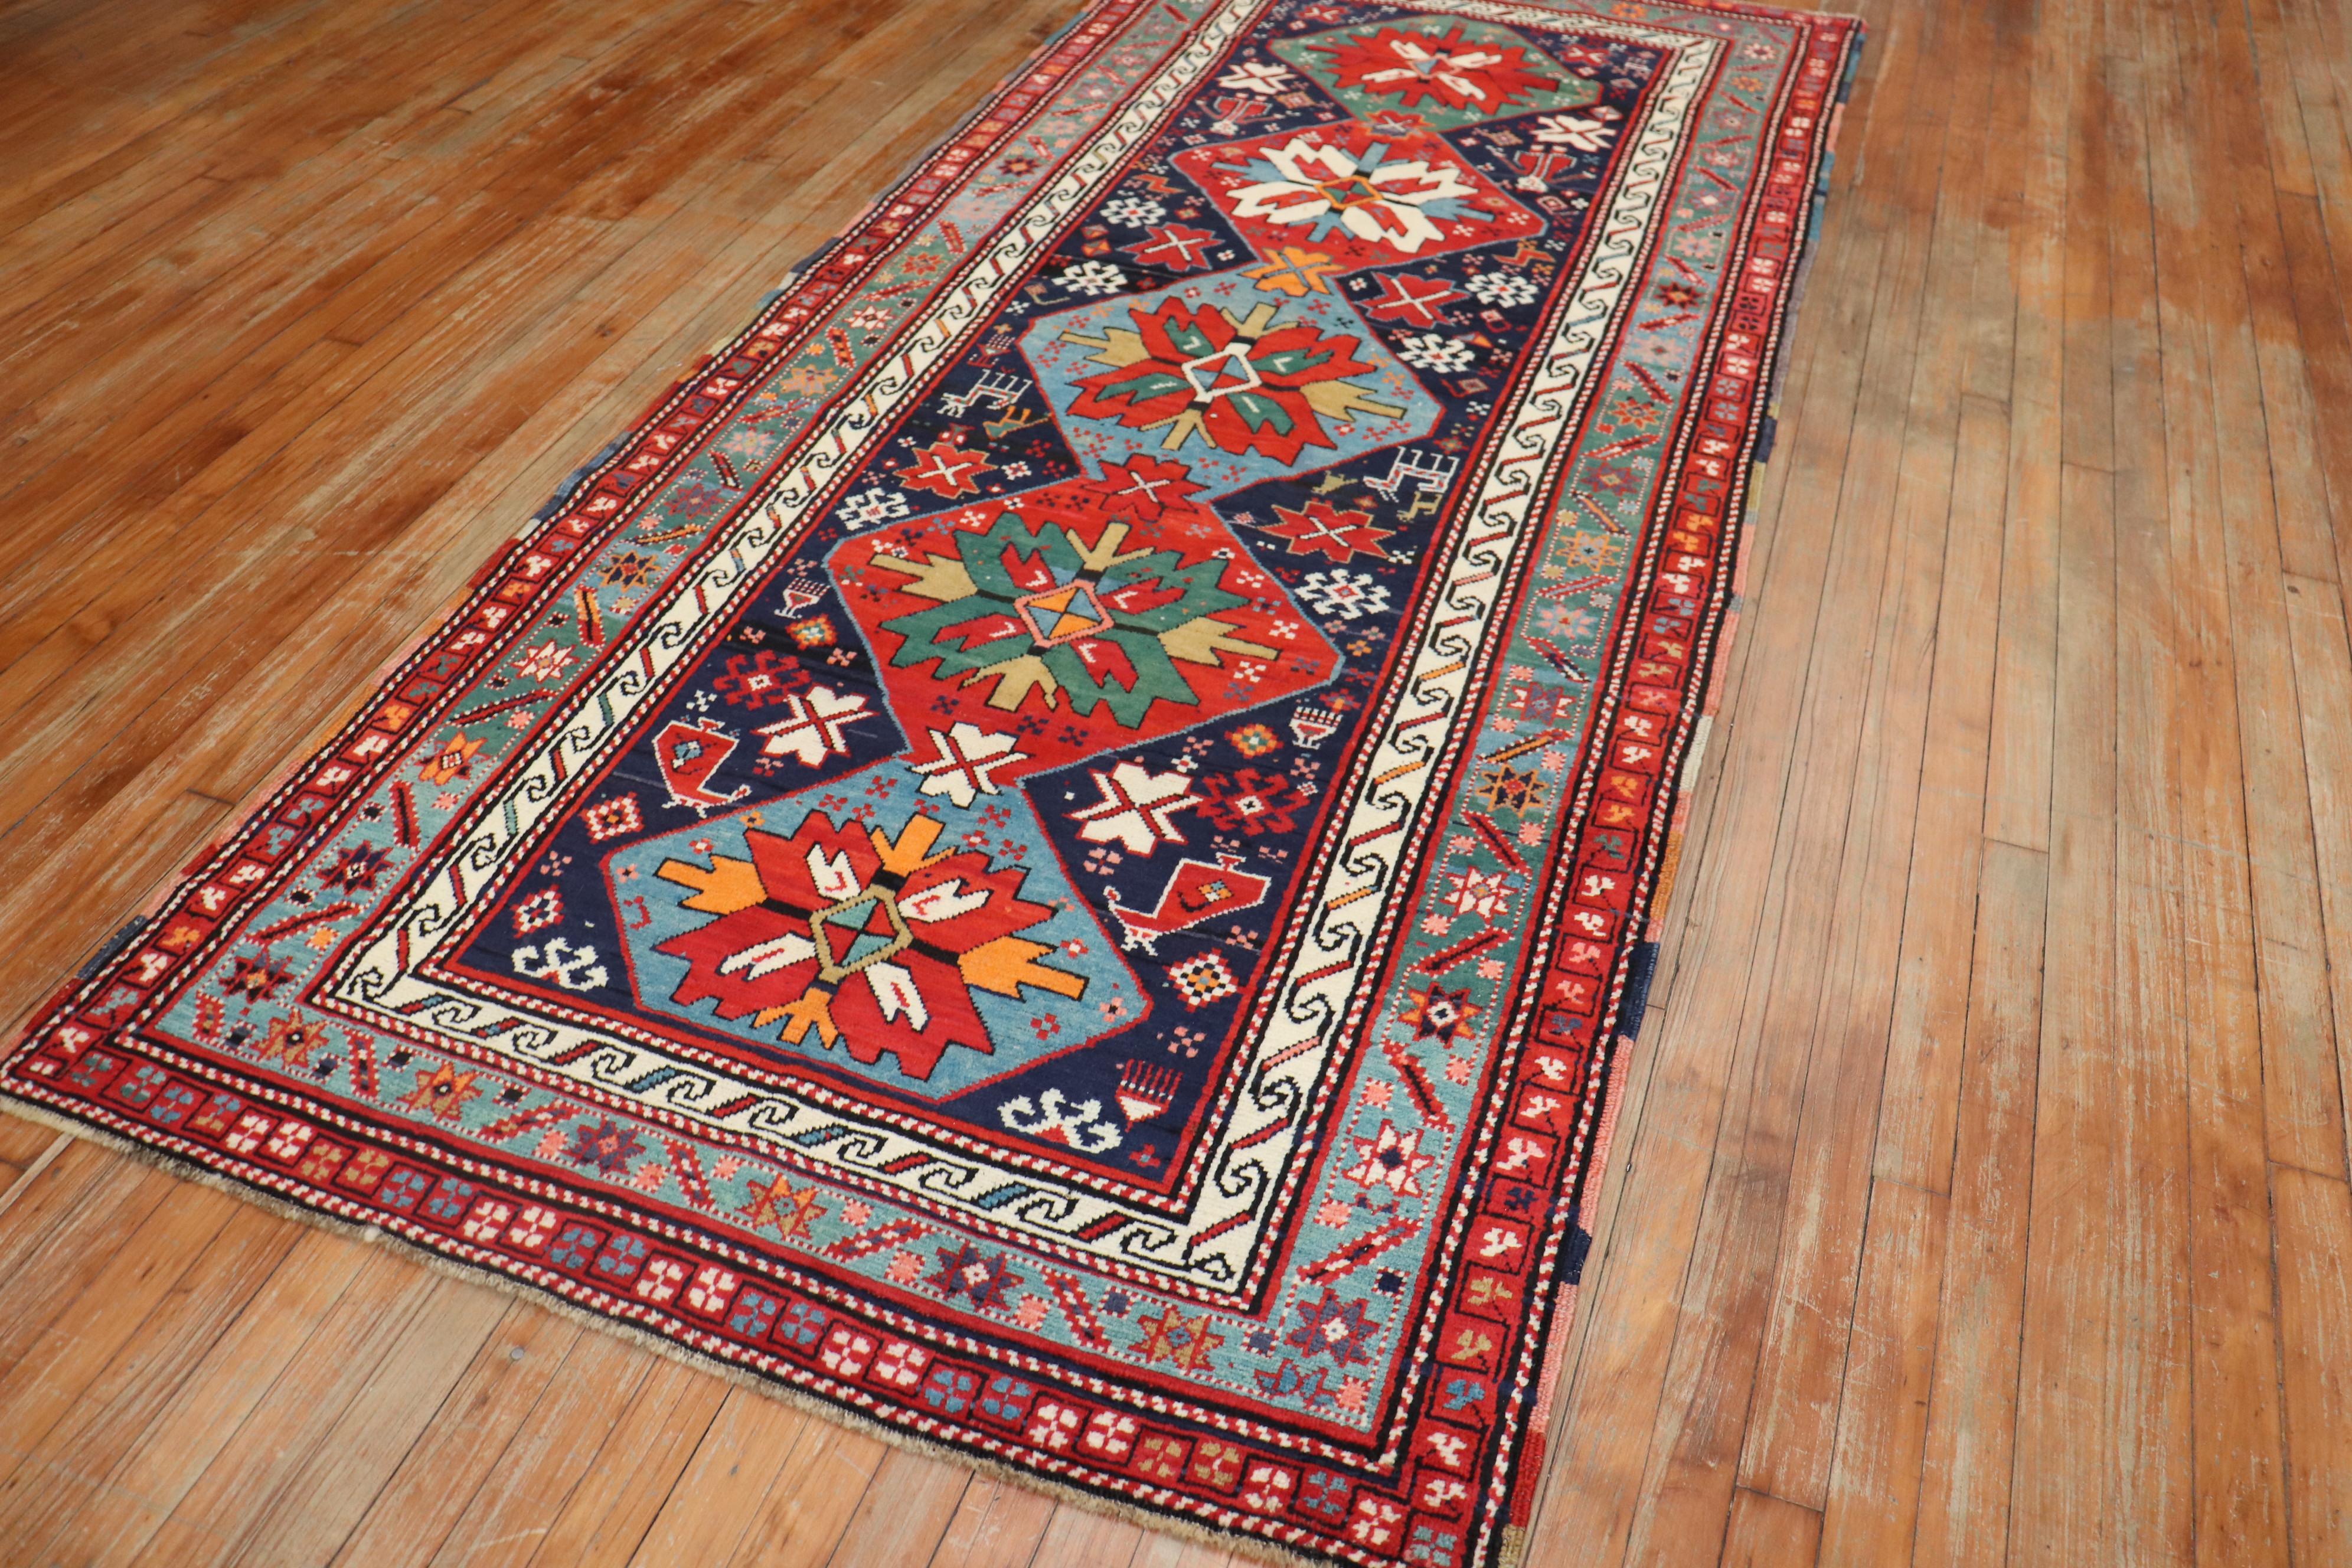 An early 20th century Caucasian Karabagh runner featuring a traditional motif in lively colors. The field is navy, green and tomato red accents. Some human figures can be spotted on the field

Measures: 3'11